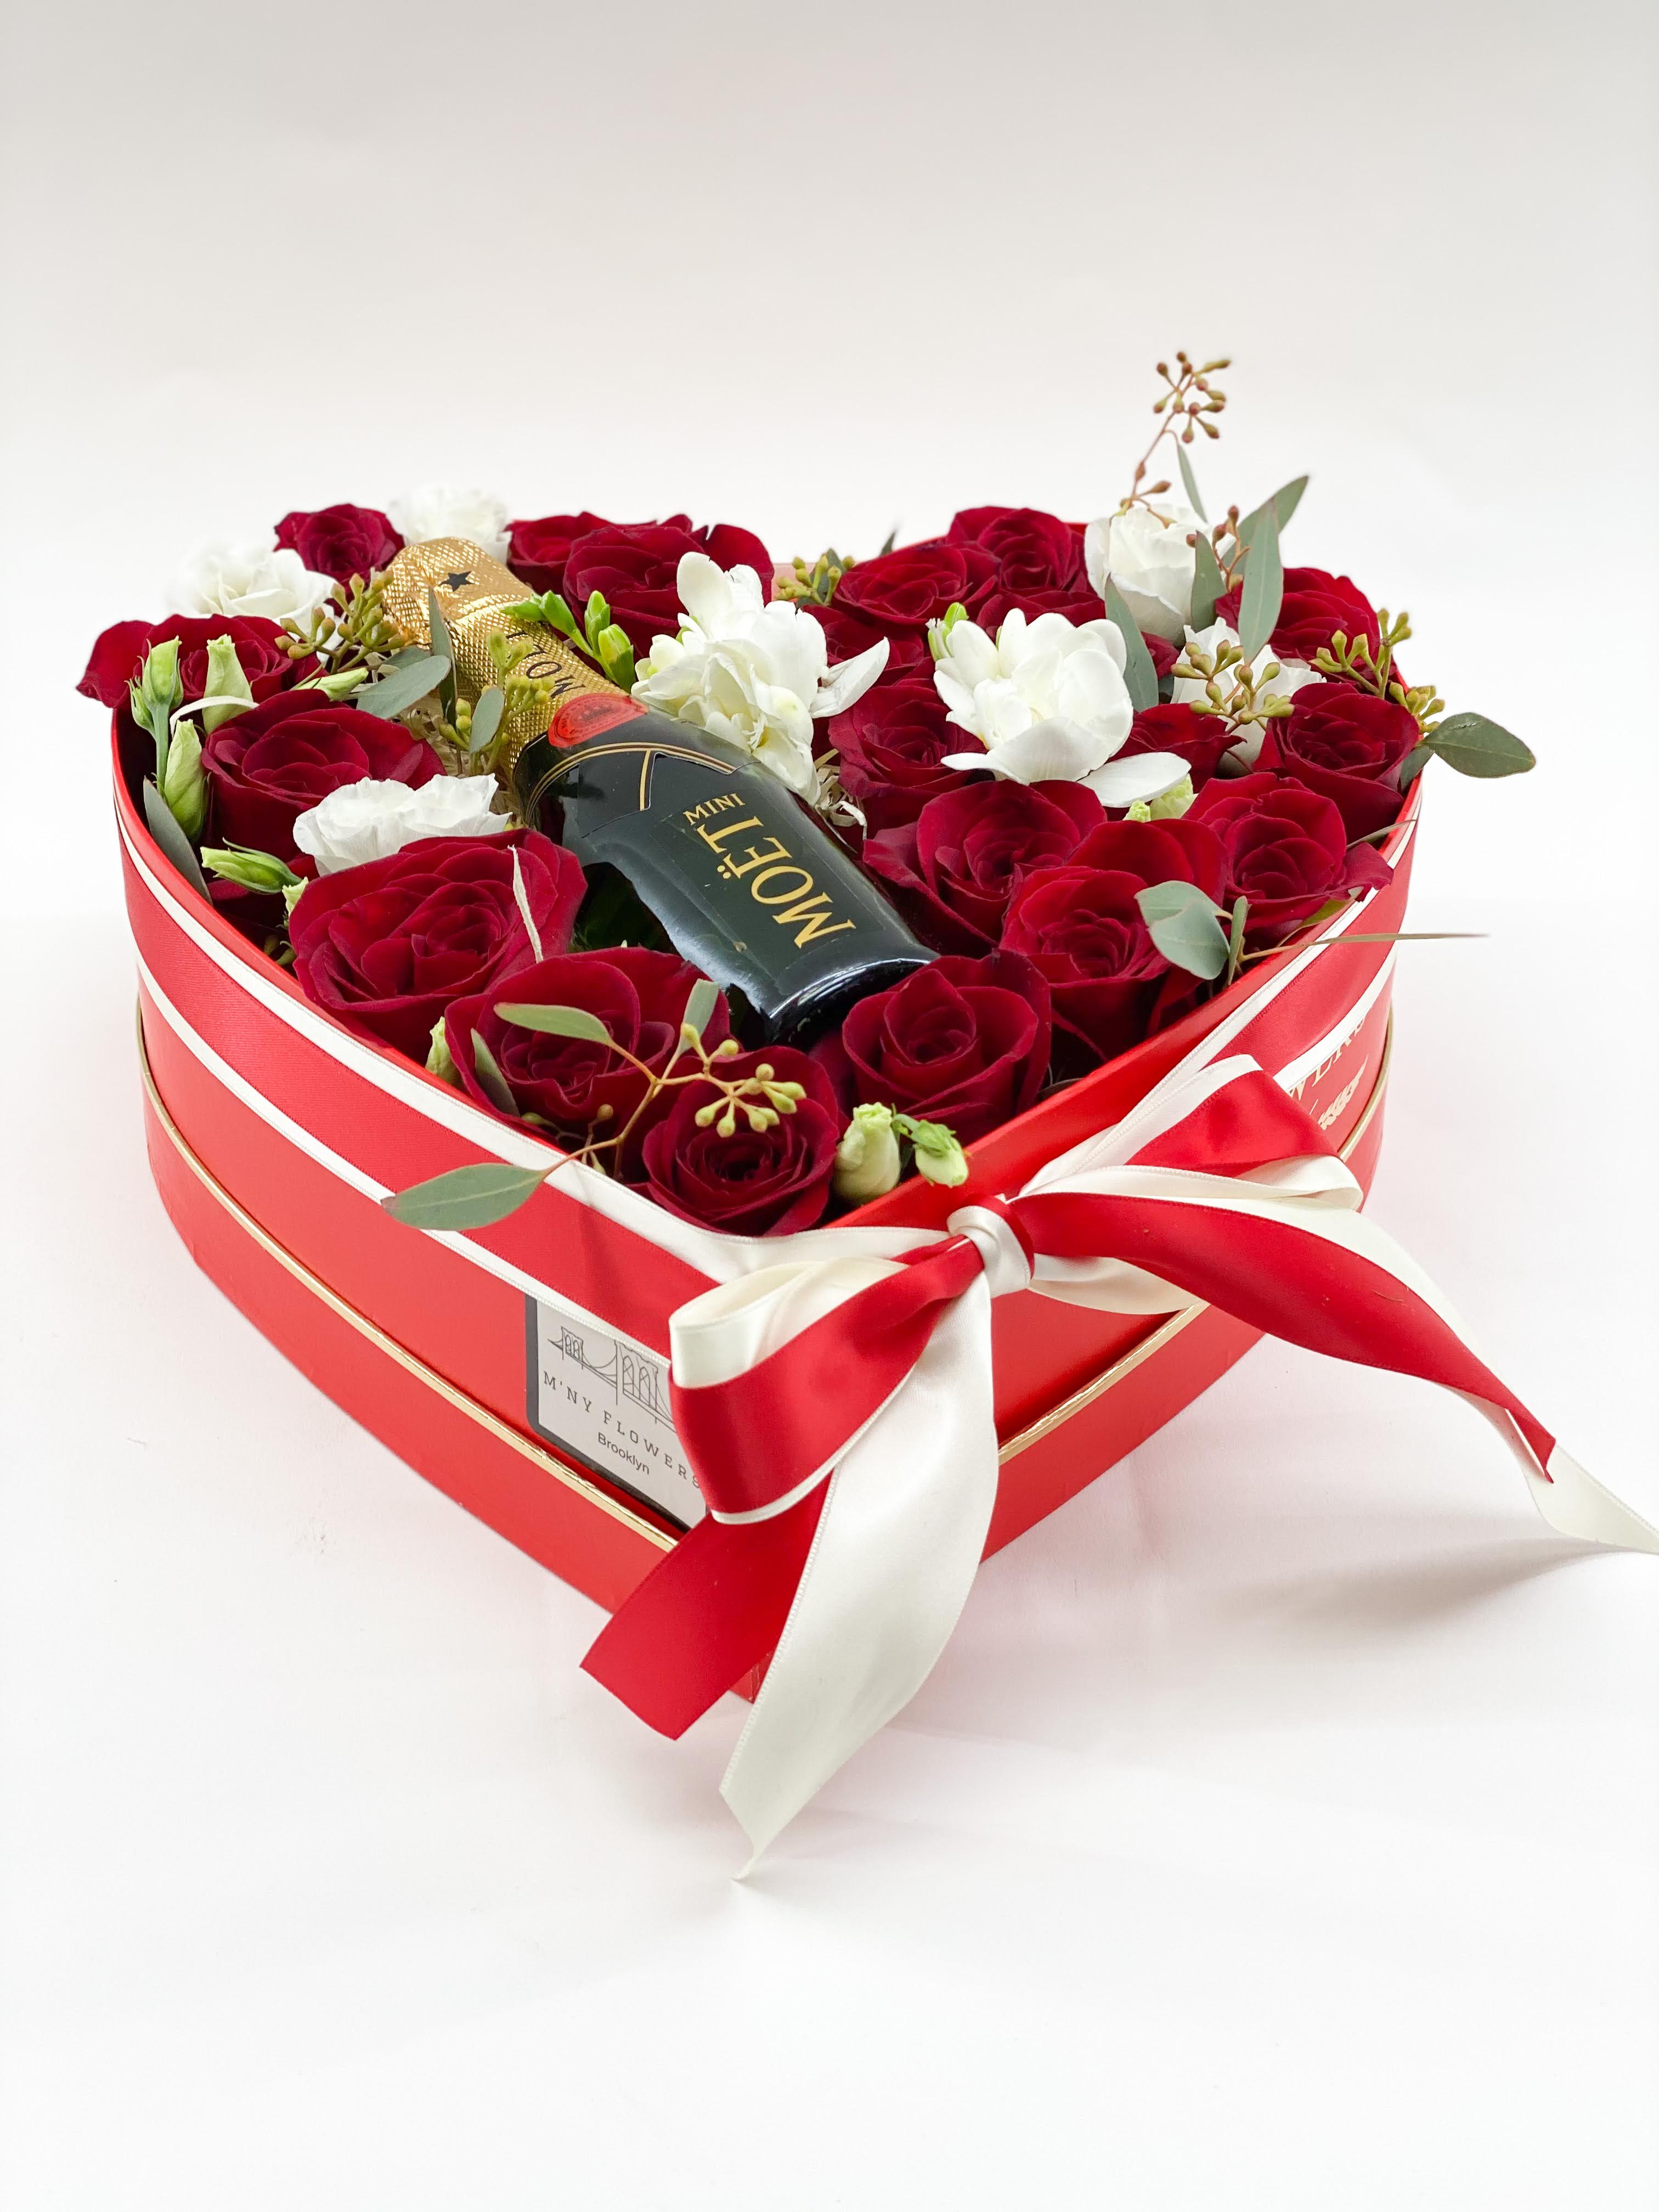 Mini Moet Red. - Box in the shape of a heart with Mini MOET &amp; Chandon beautifully decorated with red roses the best gift for any occasion.